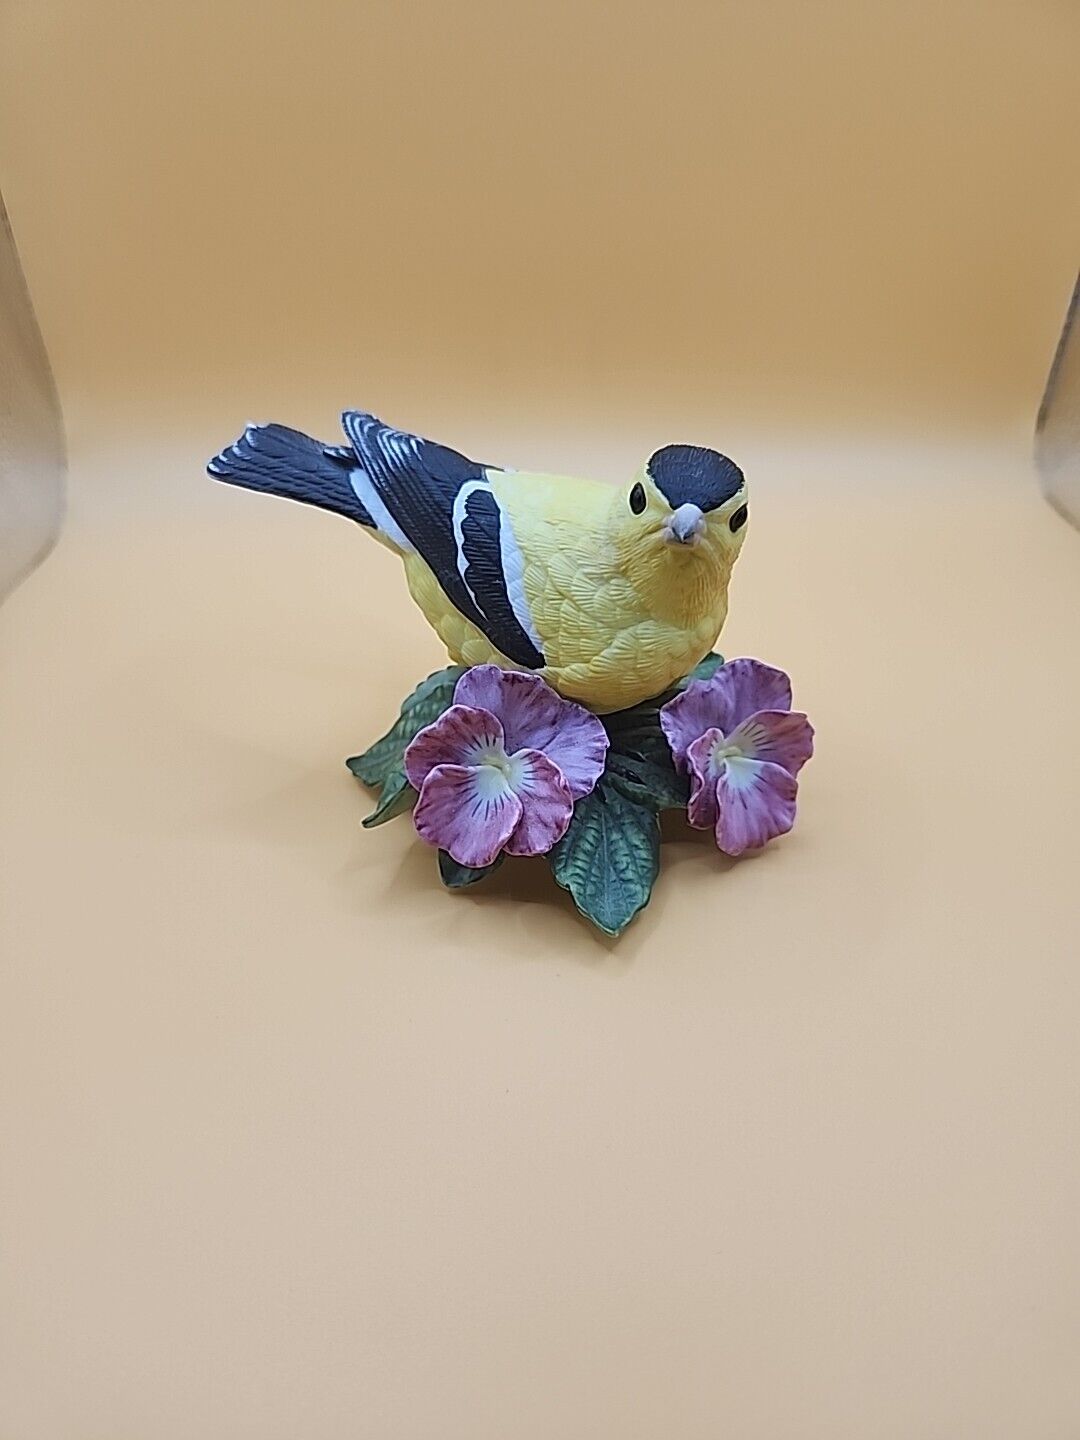 Vintage Lenox Collection American Goldfinch Porcelain Bird Figurine In Box